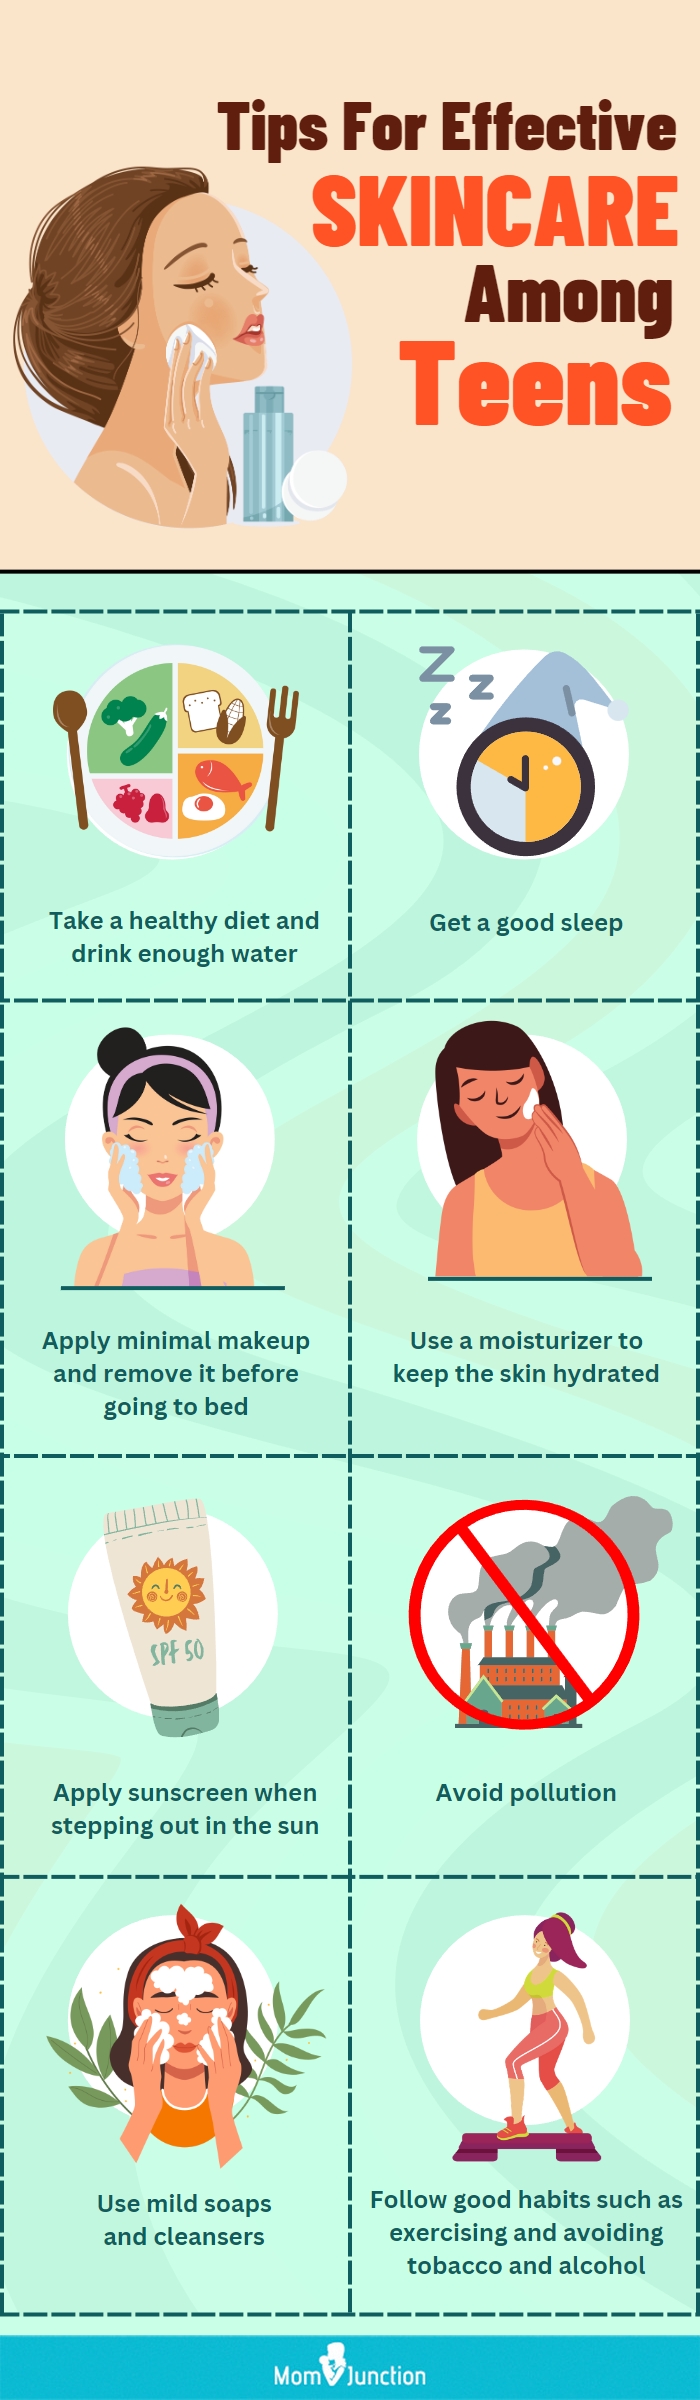 tips for effective skincare among teens (infographic)